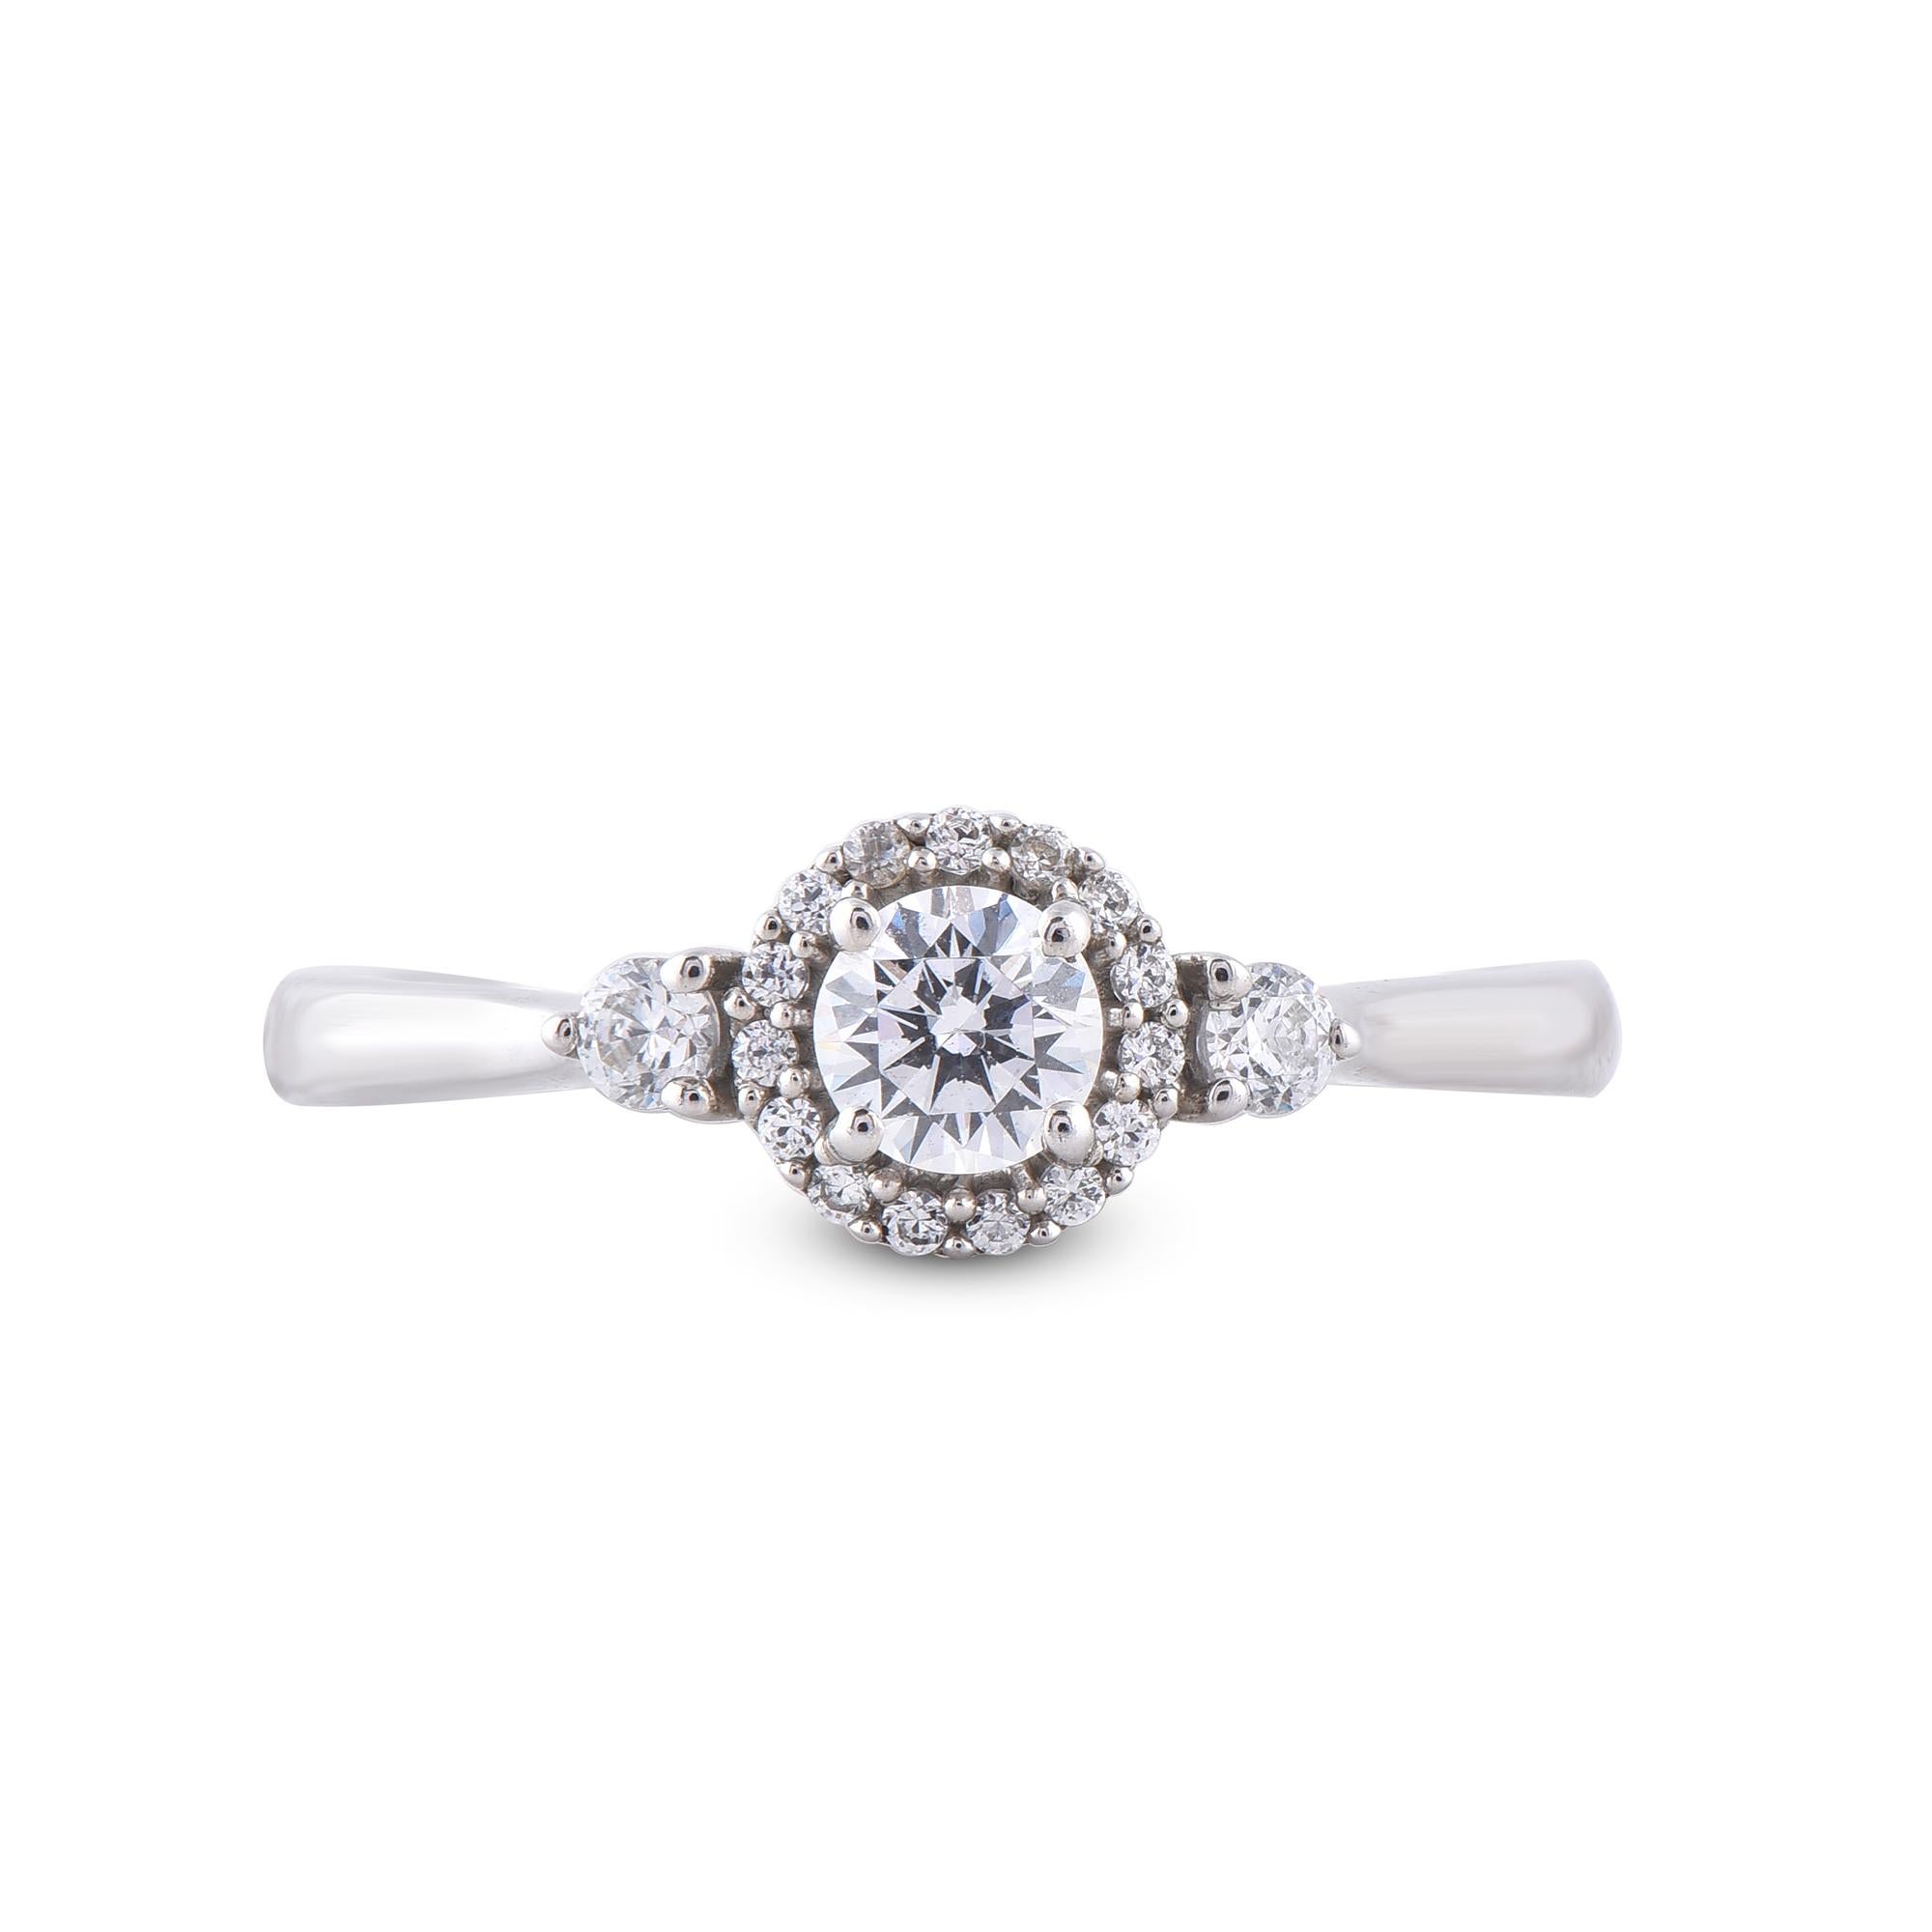 Truly exquisite, this diamond anniversary ring is sure to be admired for the inherent classic beauty and elegance within its design. These ring is crafted in 14KT white gold, and studded with 18 single cut and brilliant cut natural diamonds in prong